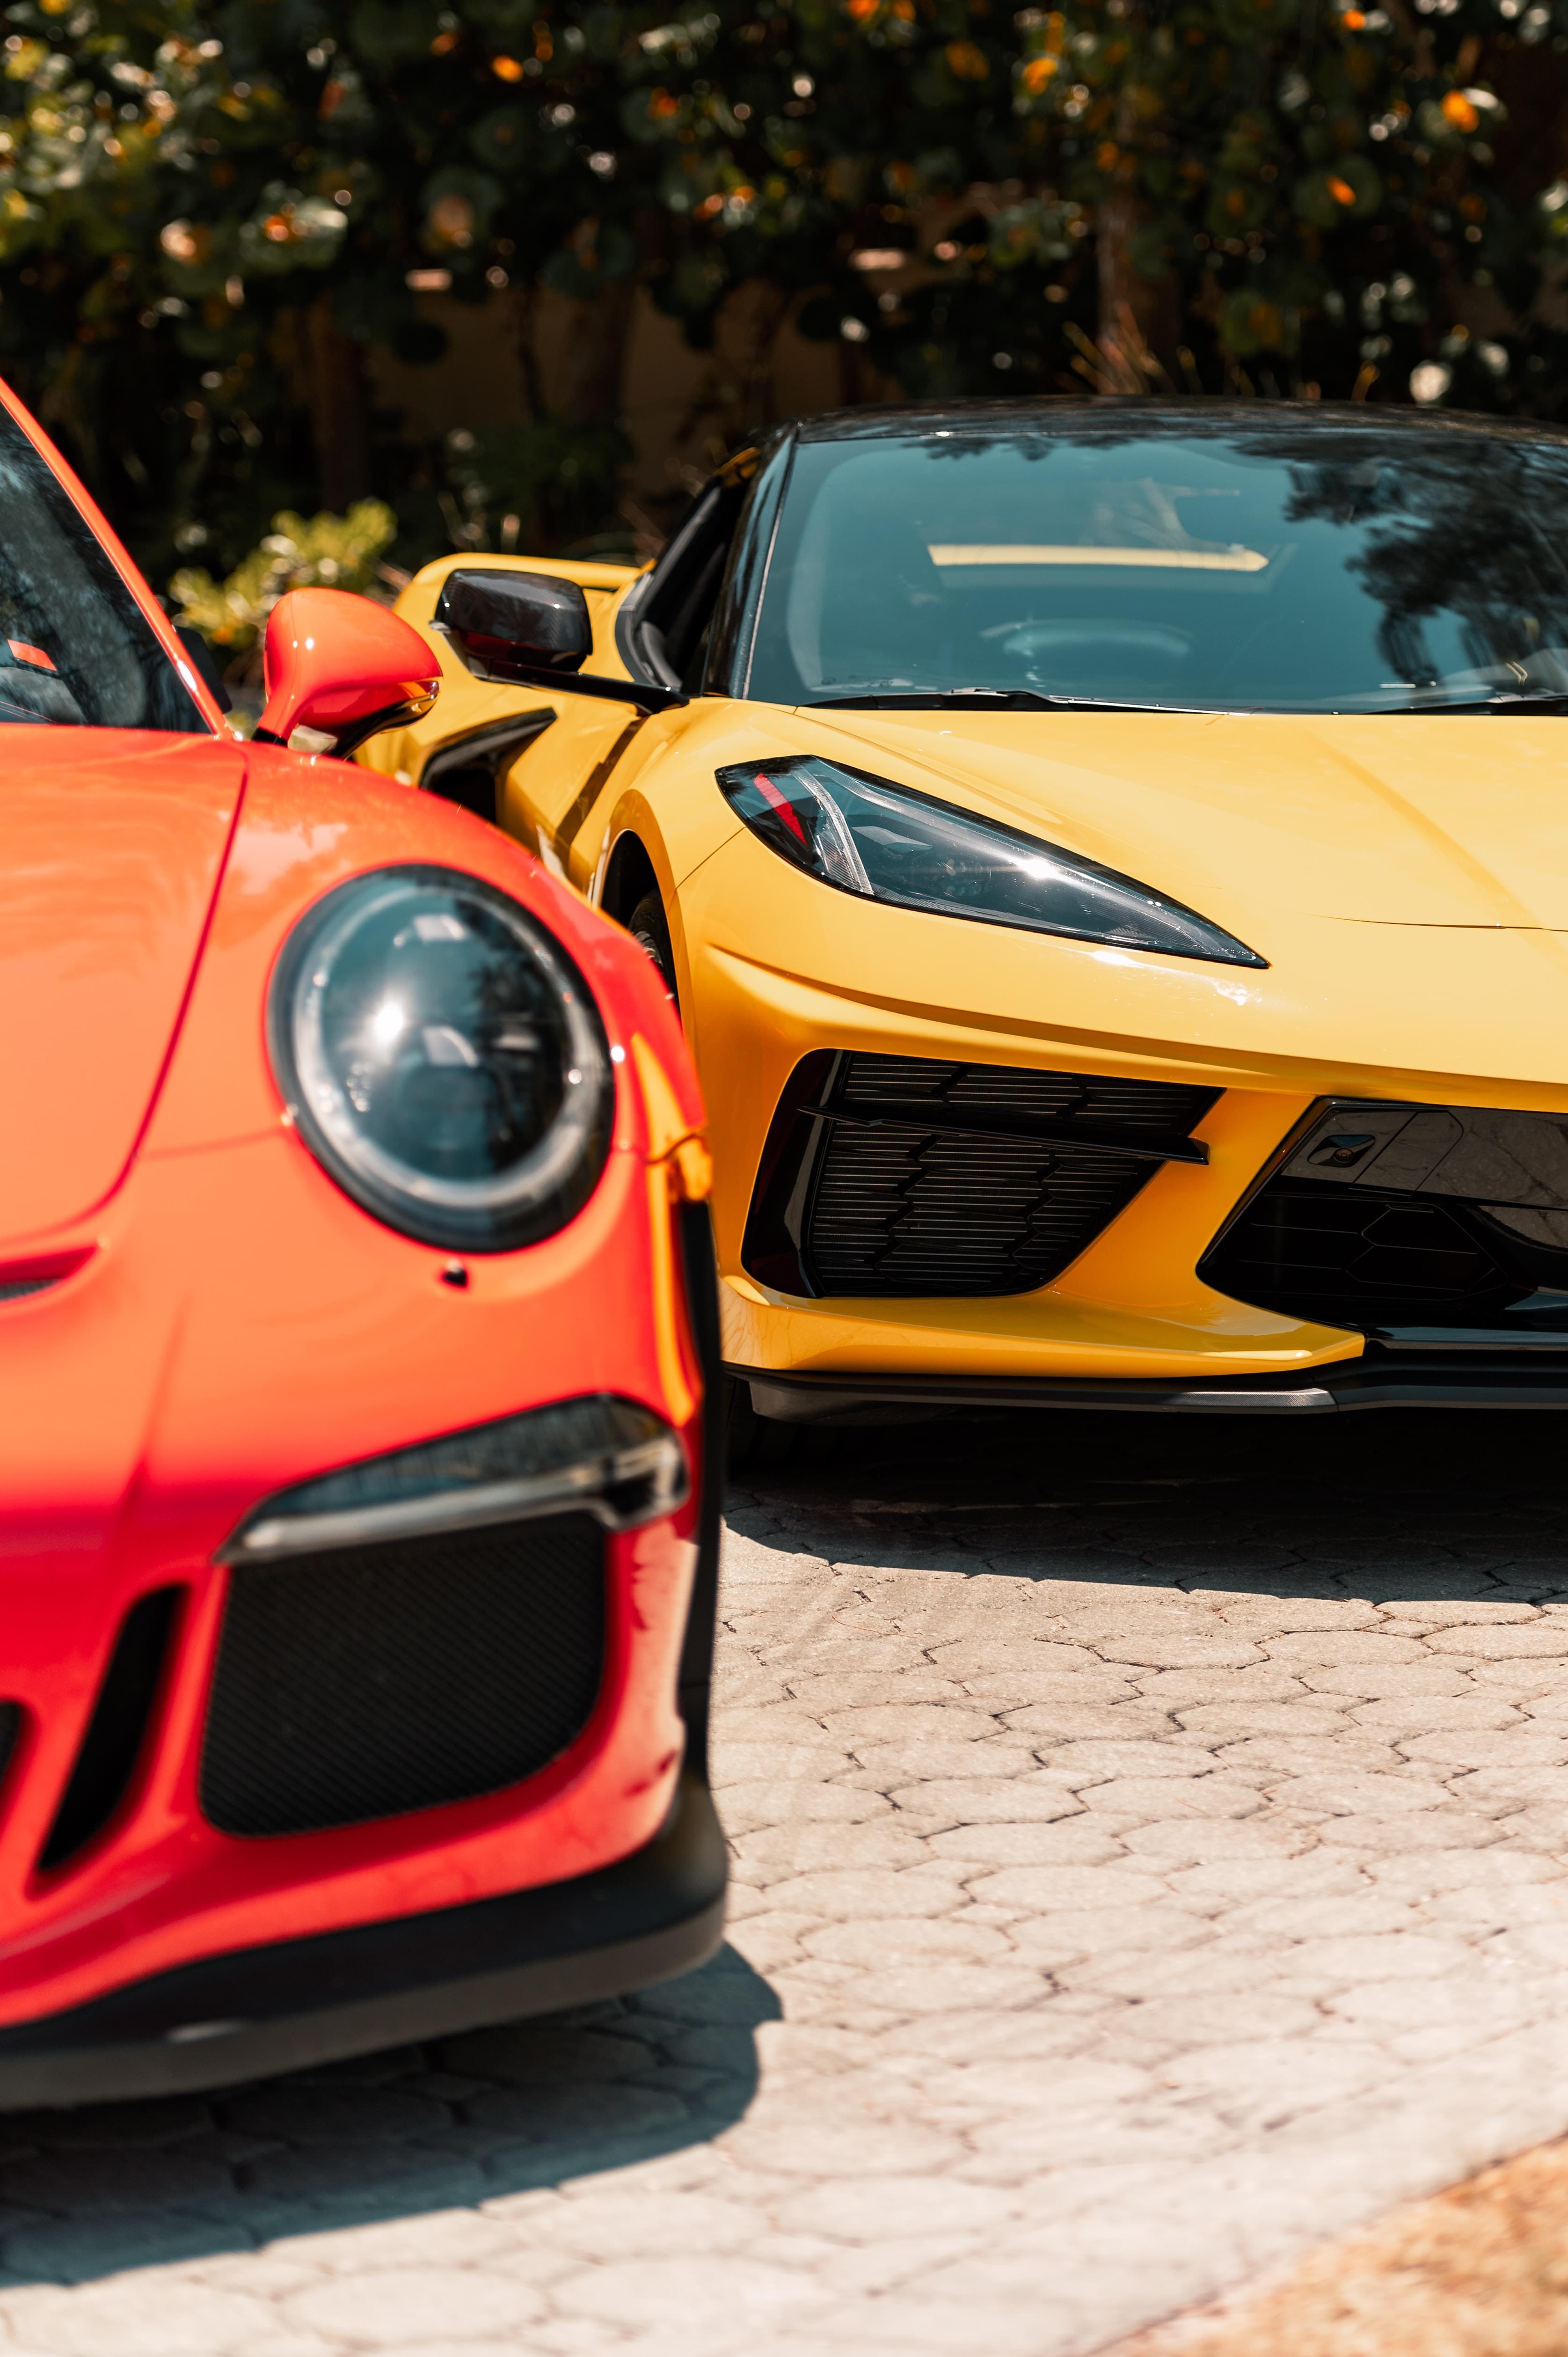 Closeup on one orange and one yellow exotic supercar in front of leafy trees